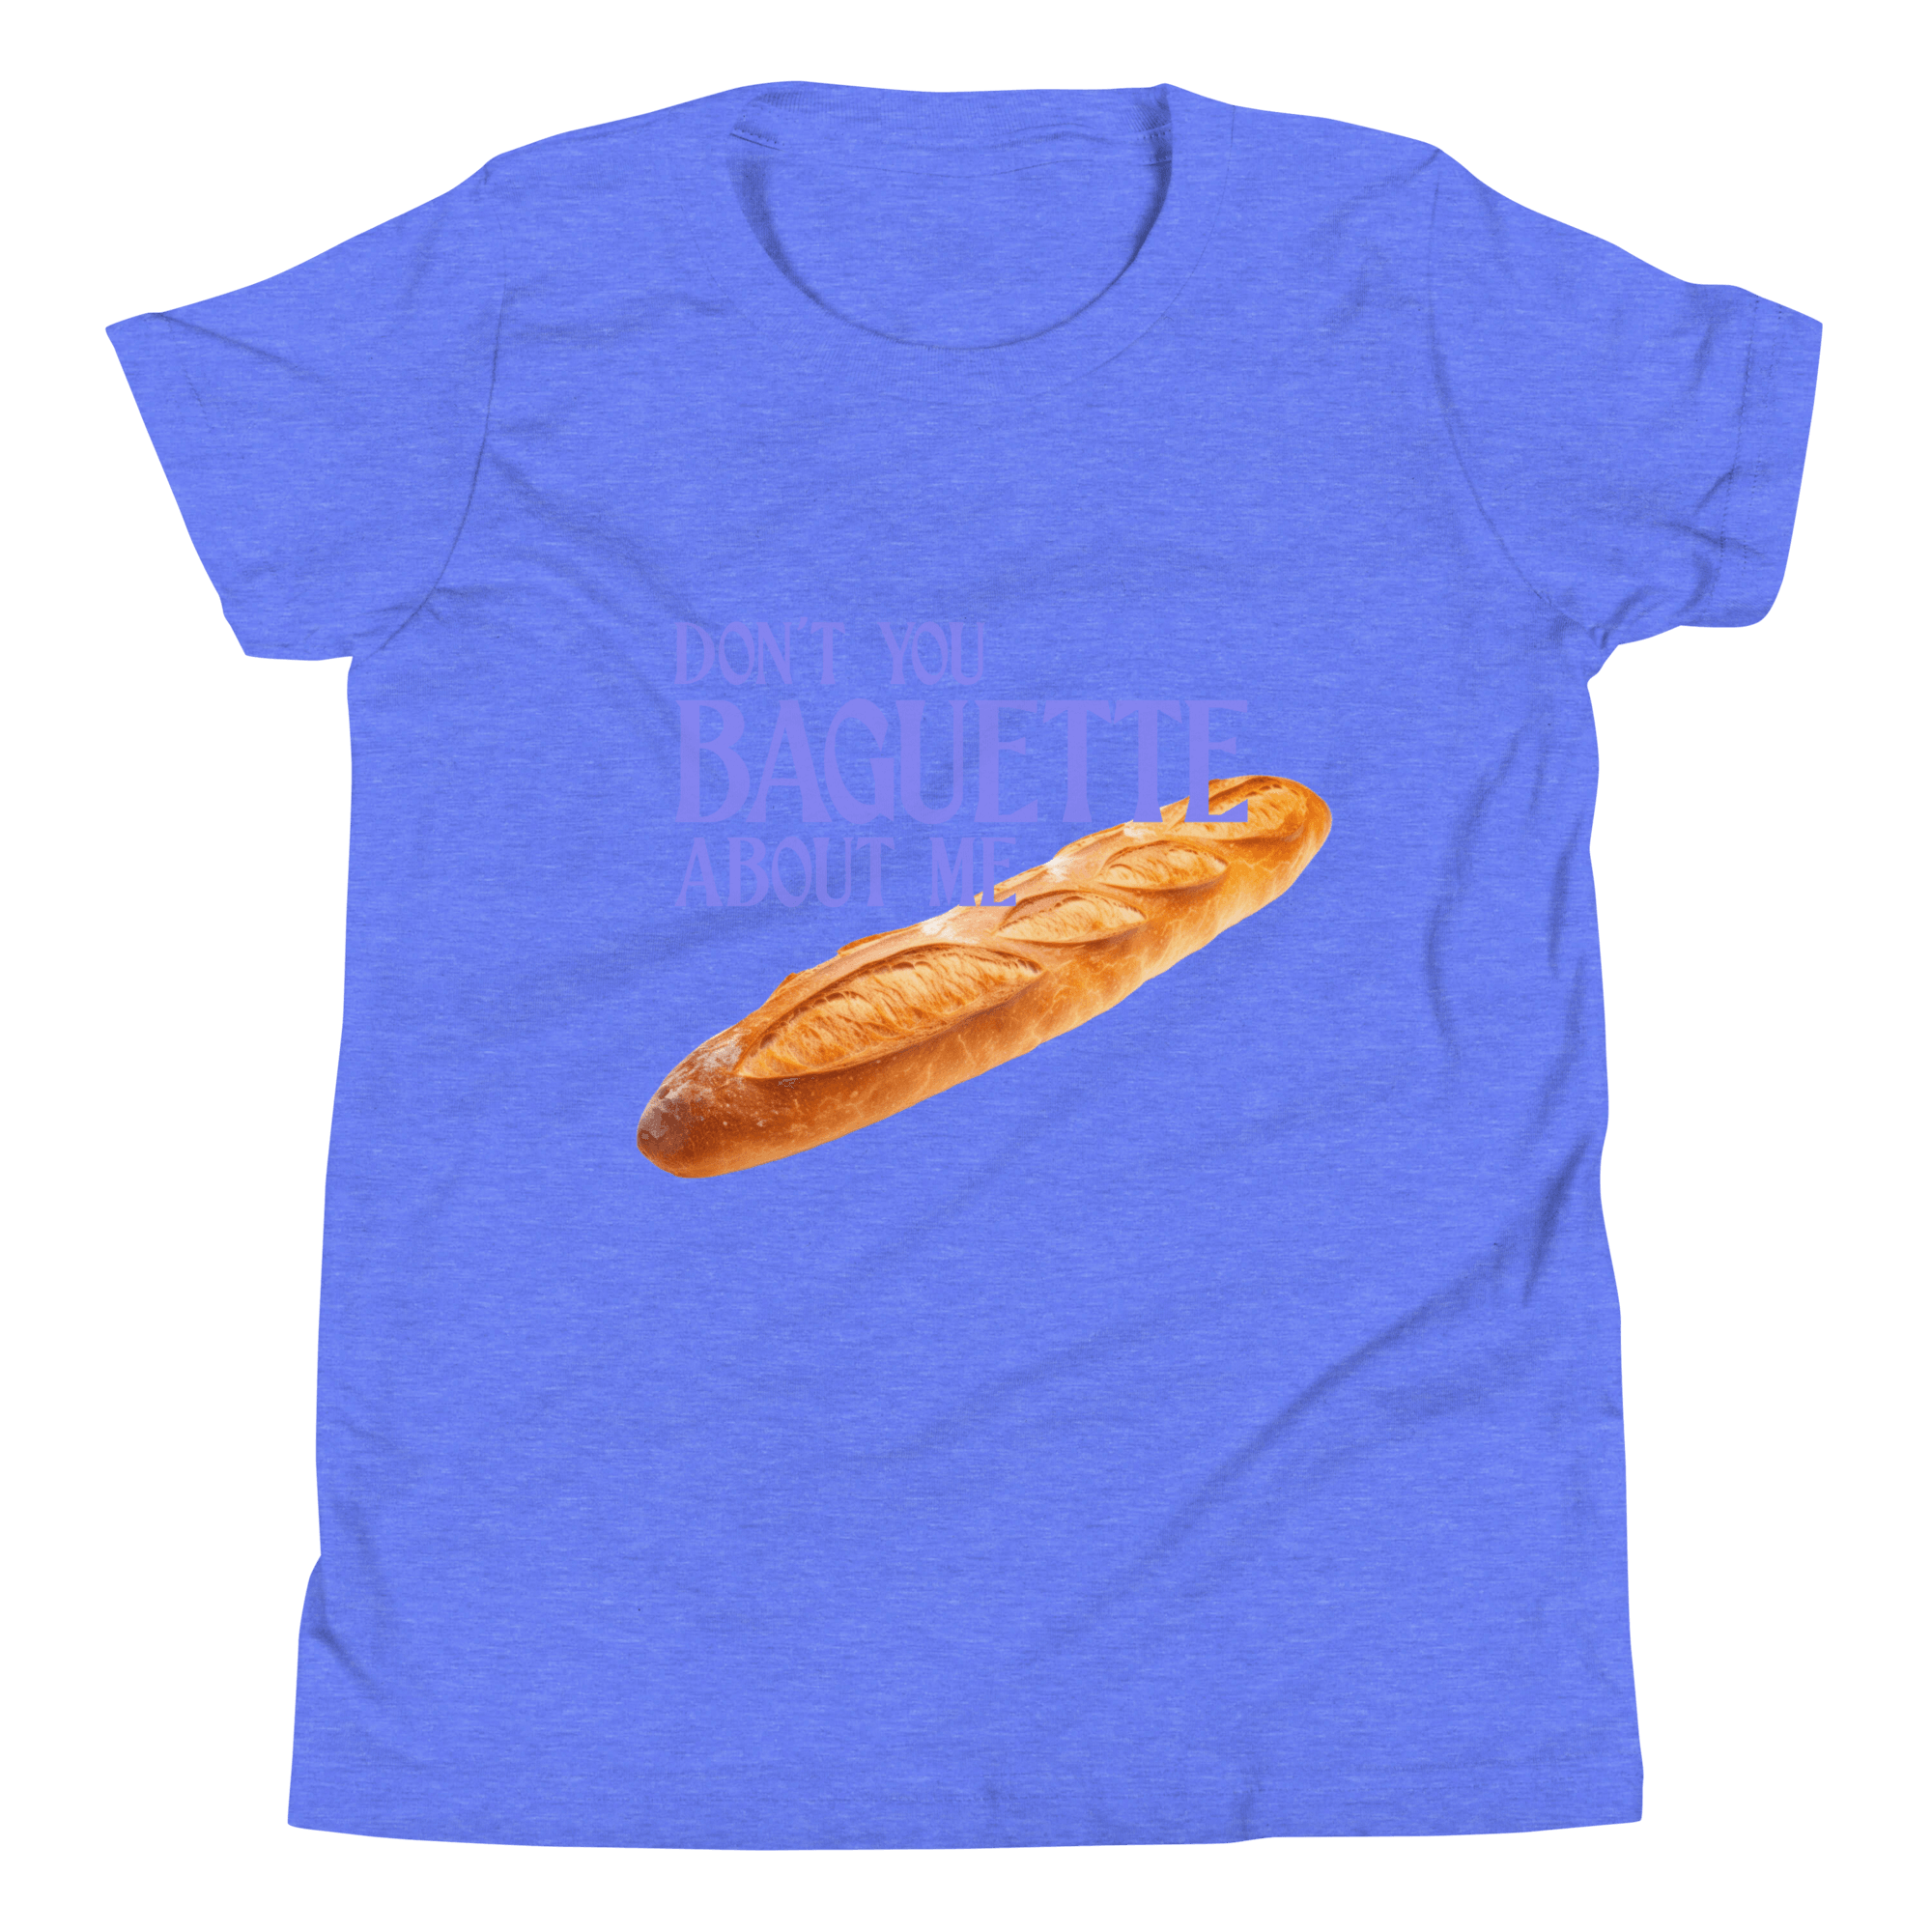 Don't You Baguette About Me Youth T-Shirt Polychrome Goods 🍊